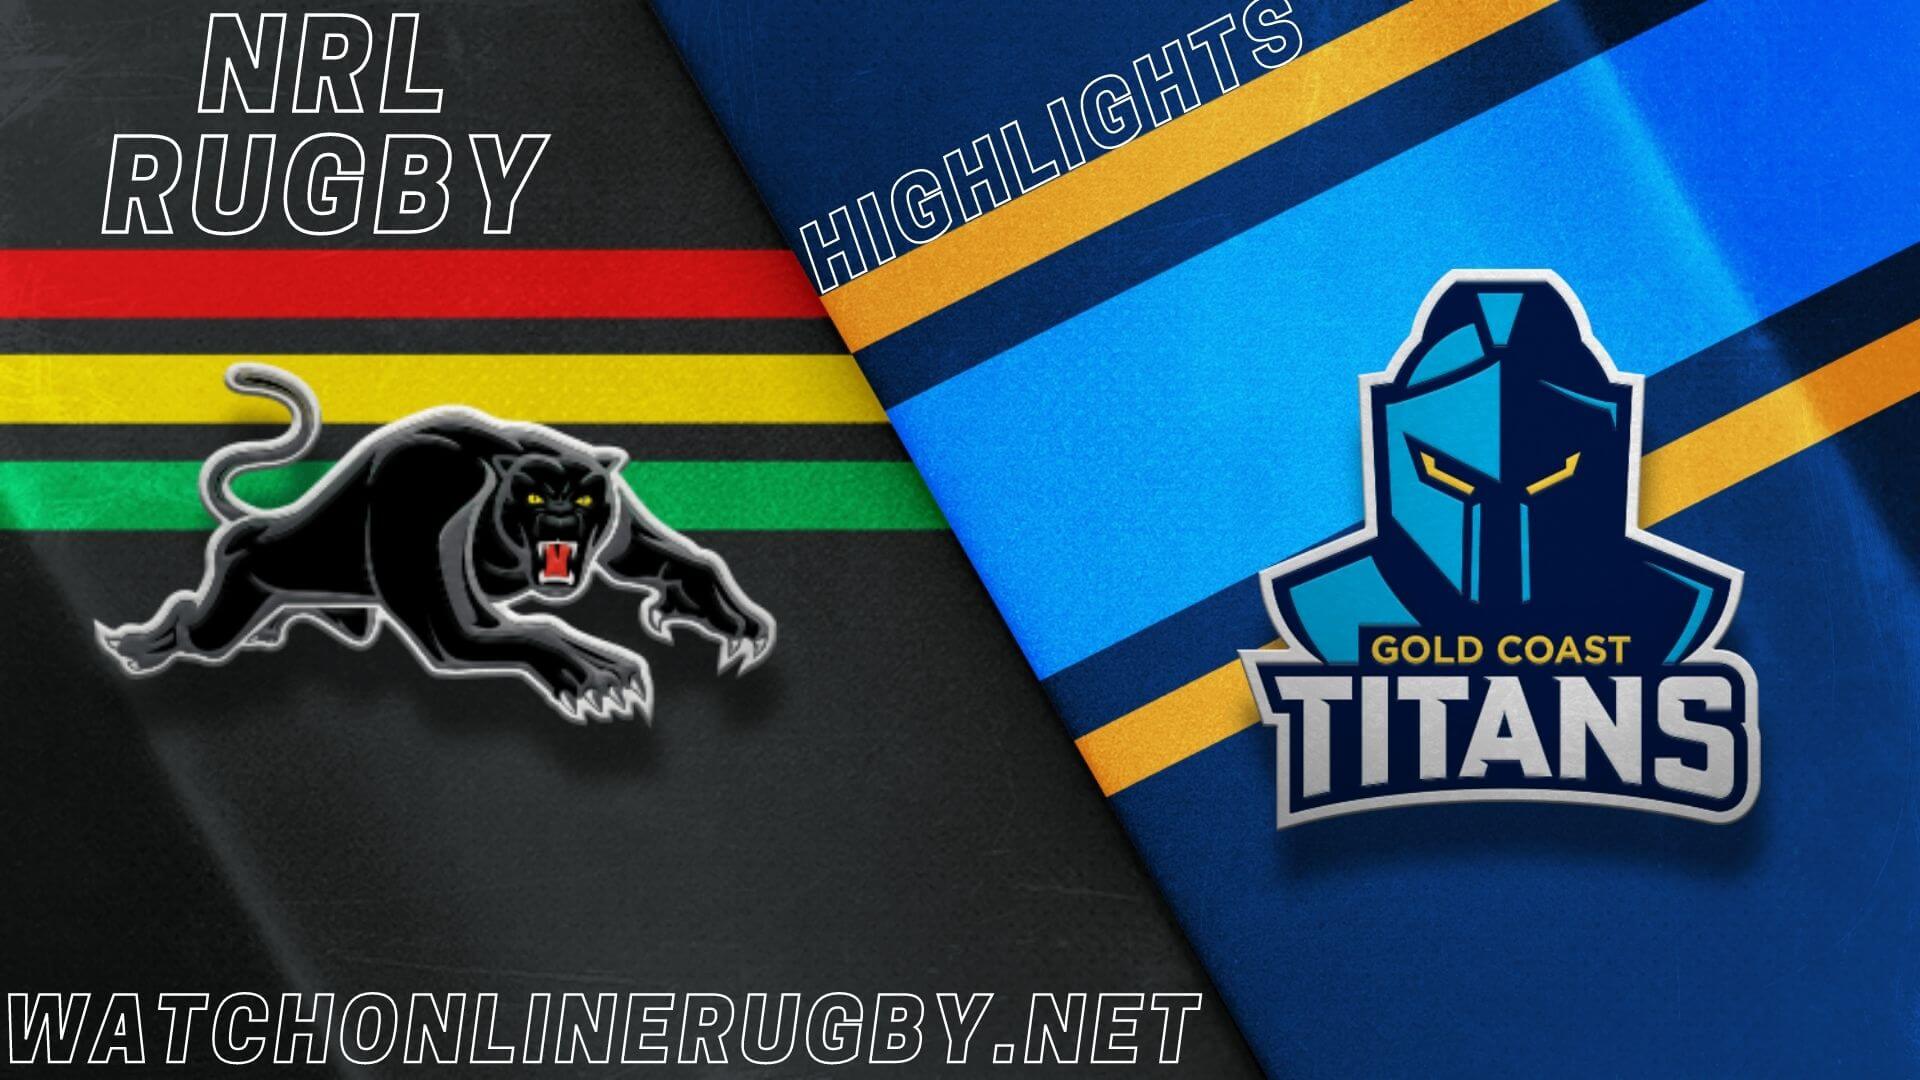 Titans Vs Panthers Highlights RD 8 NRL Rugby